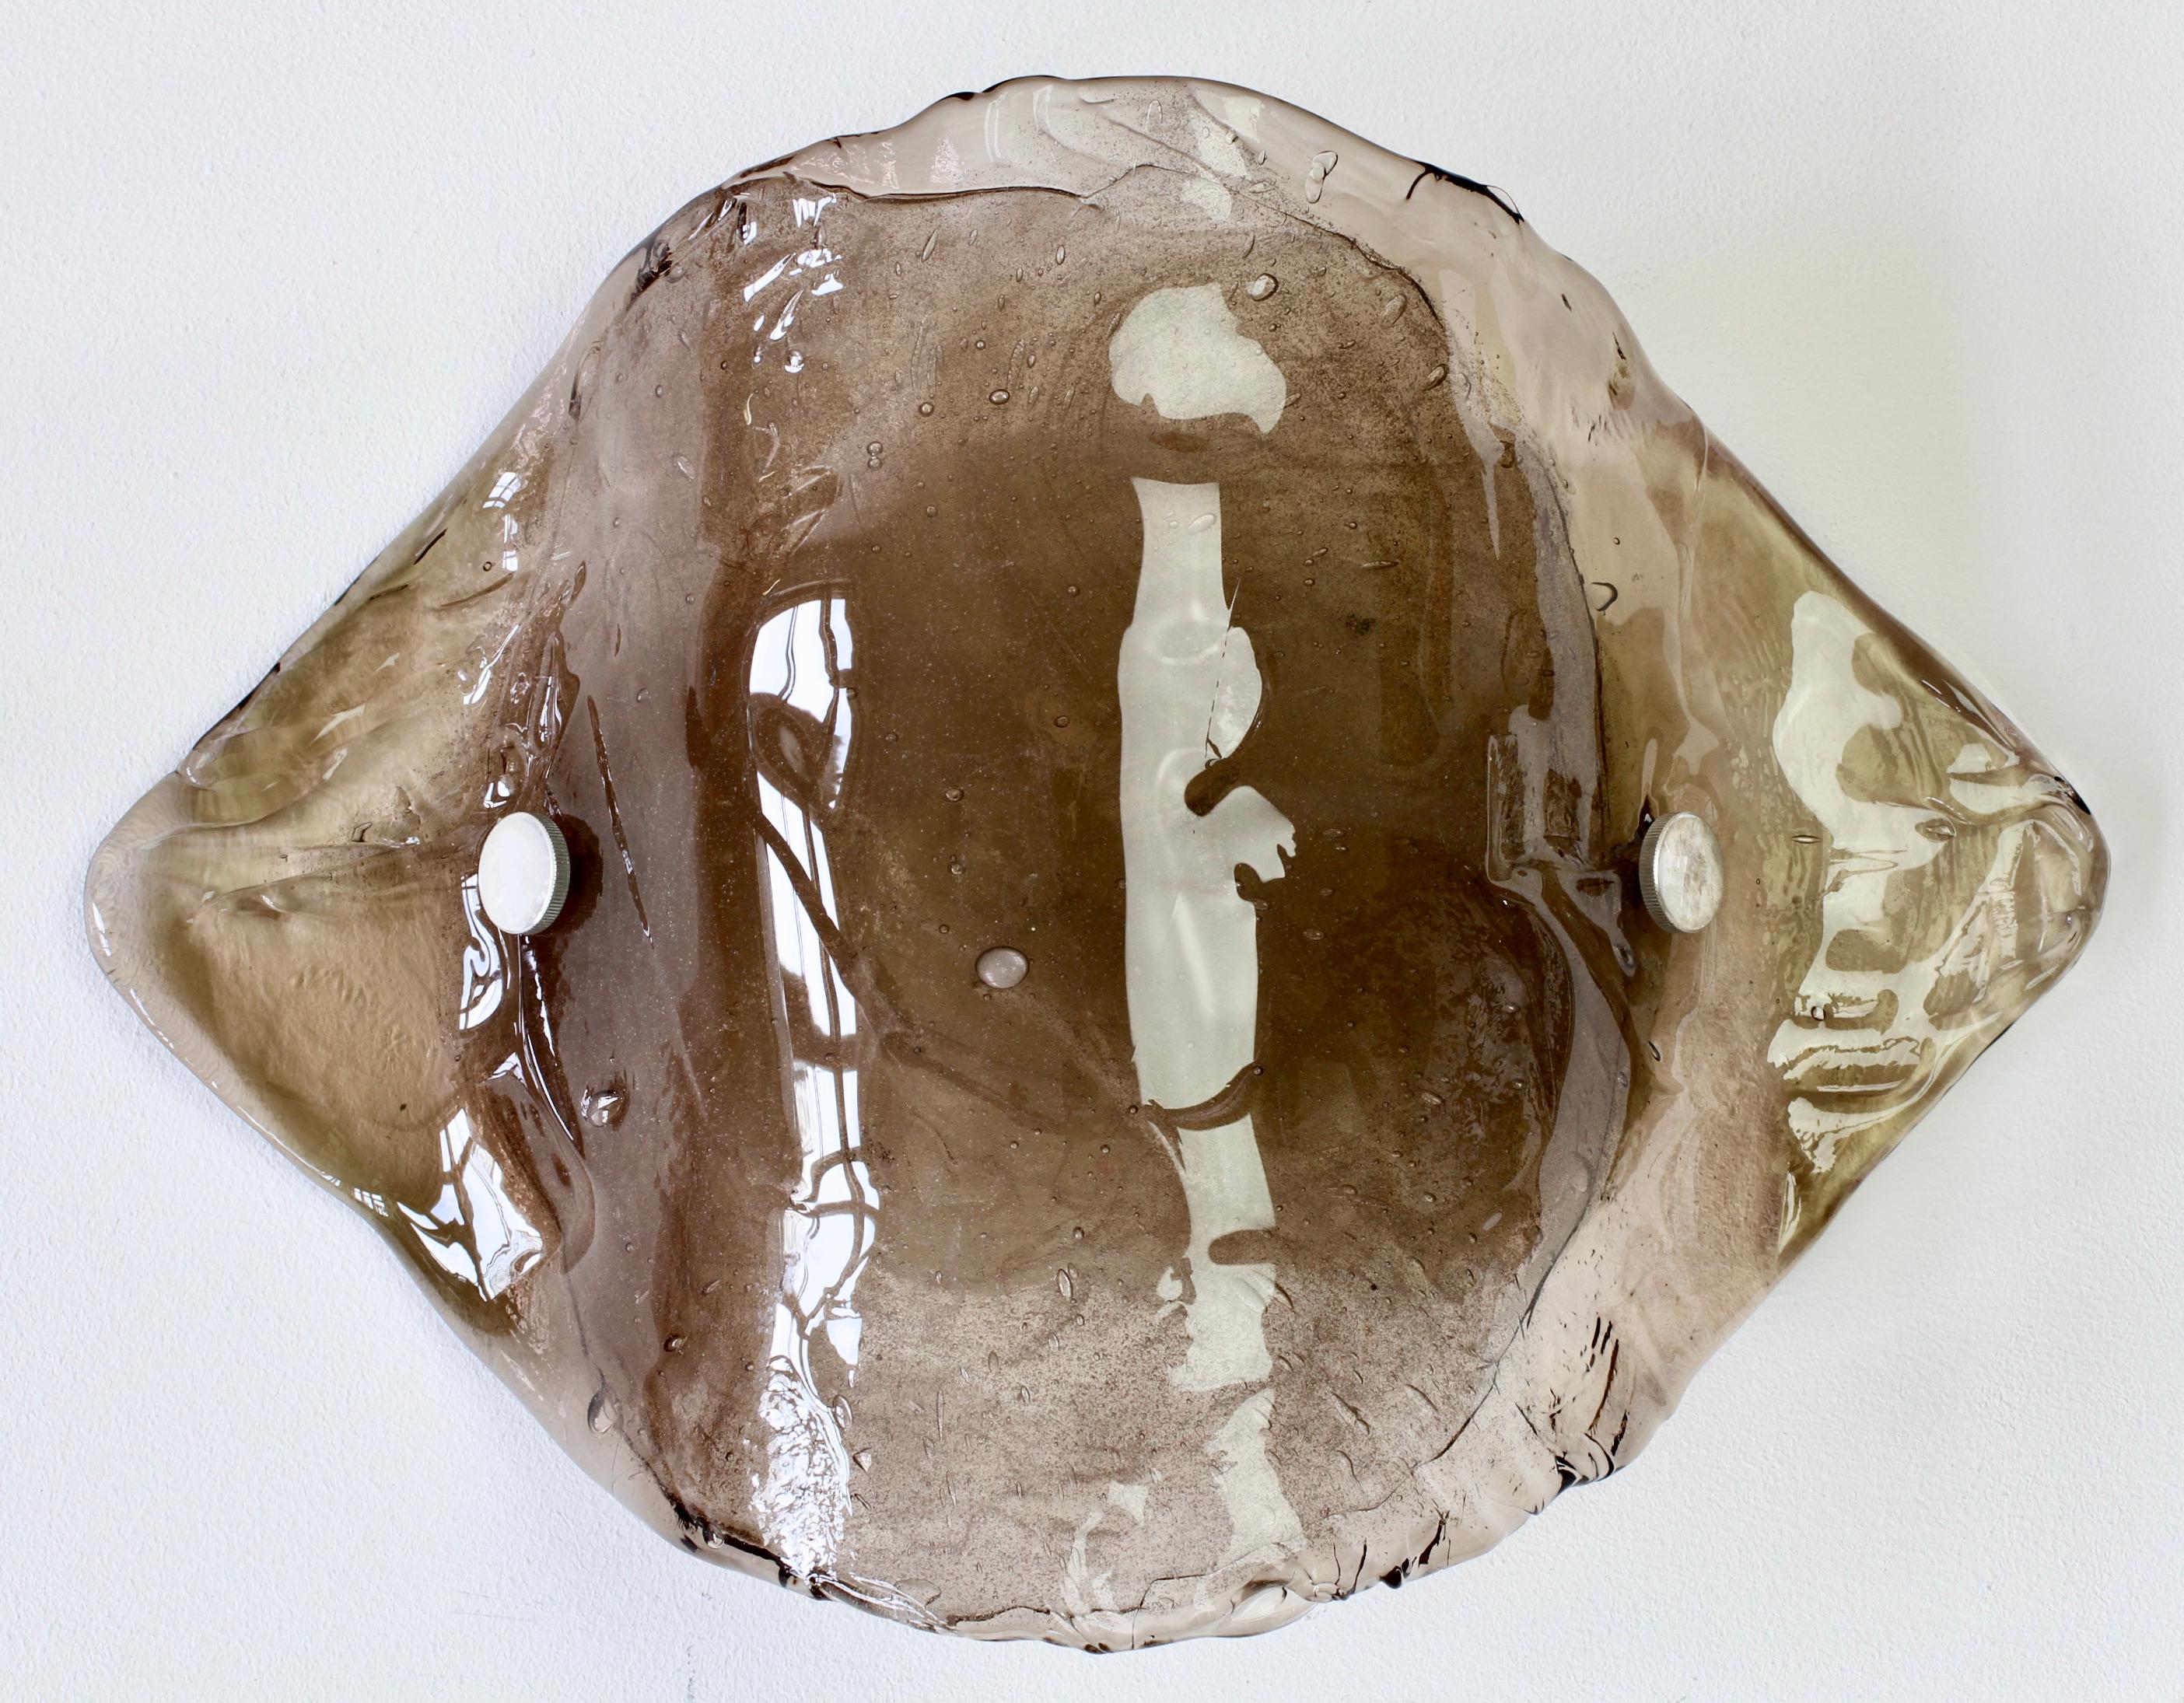 Kalmar large & elegant vintage Mid-Century Modern Austrian made Murano glass wall light., lamp or sconce, made circa 1970. The light / sconce features a large handmade piece of clear glass with a brown toned centre held, by two steel screws, to a